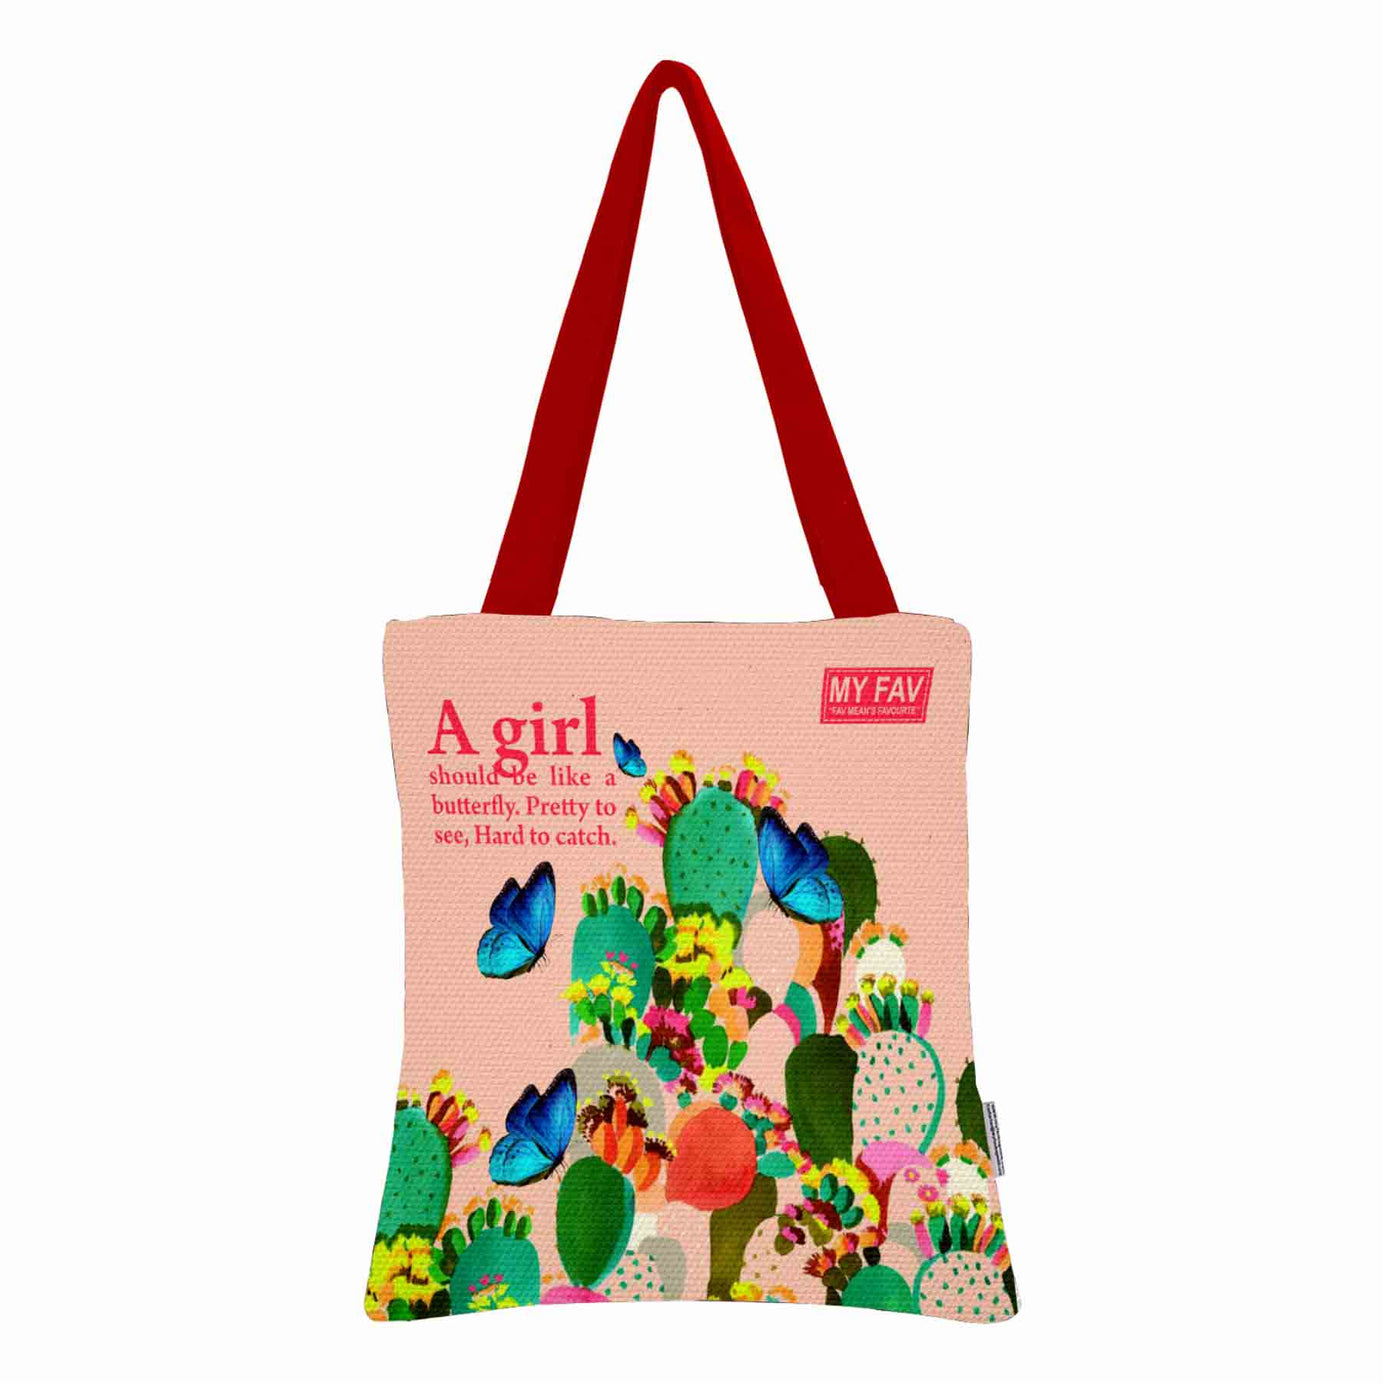 My Fav Butterfly Printed Cotton Canvas Tote Bag